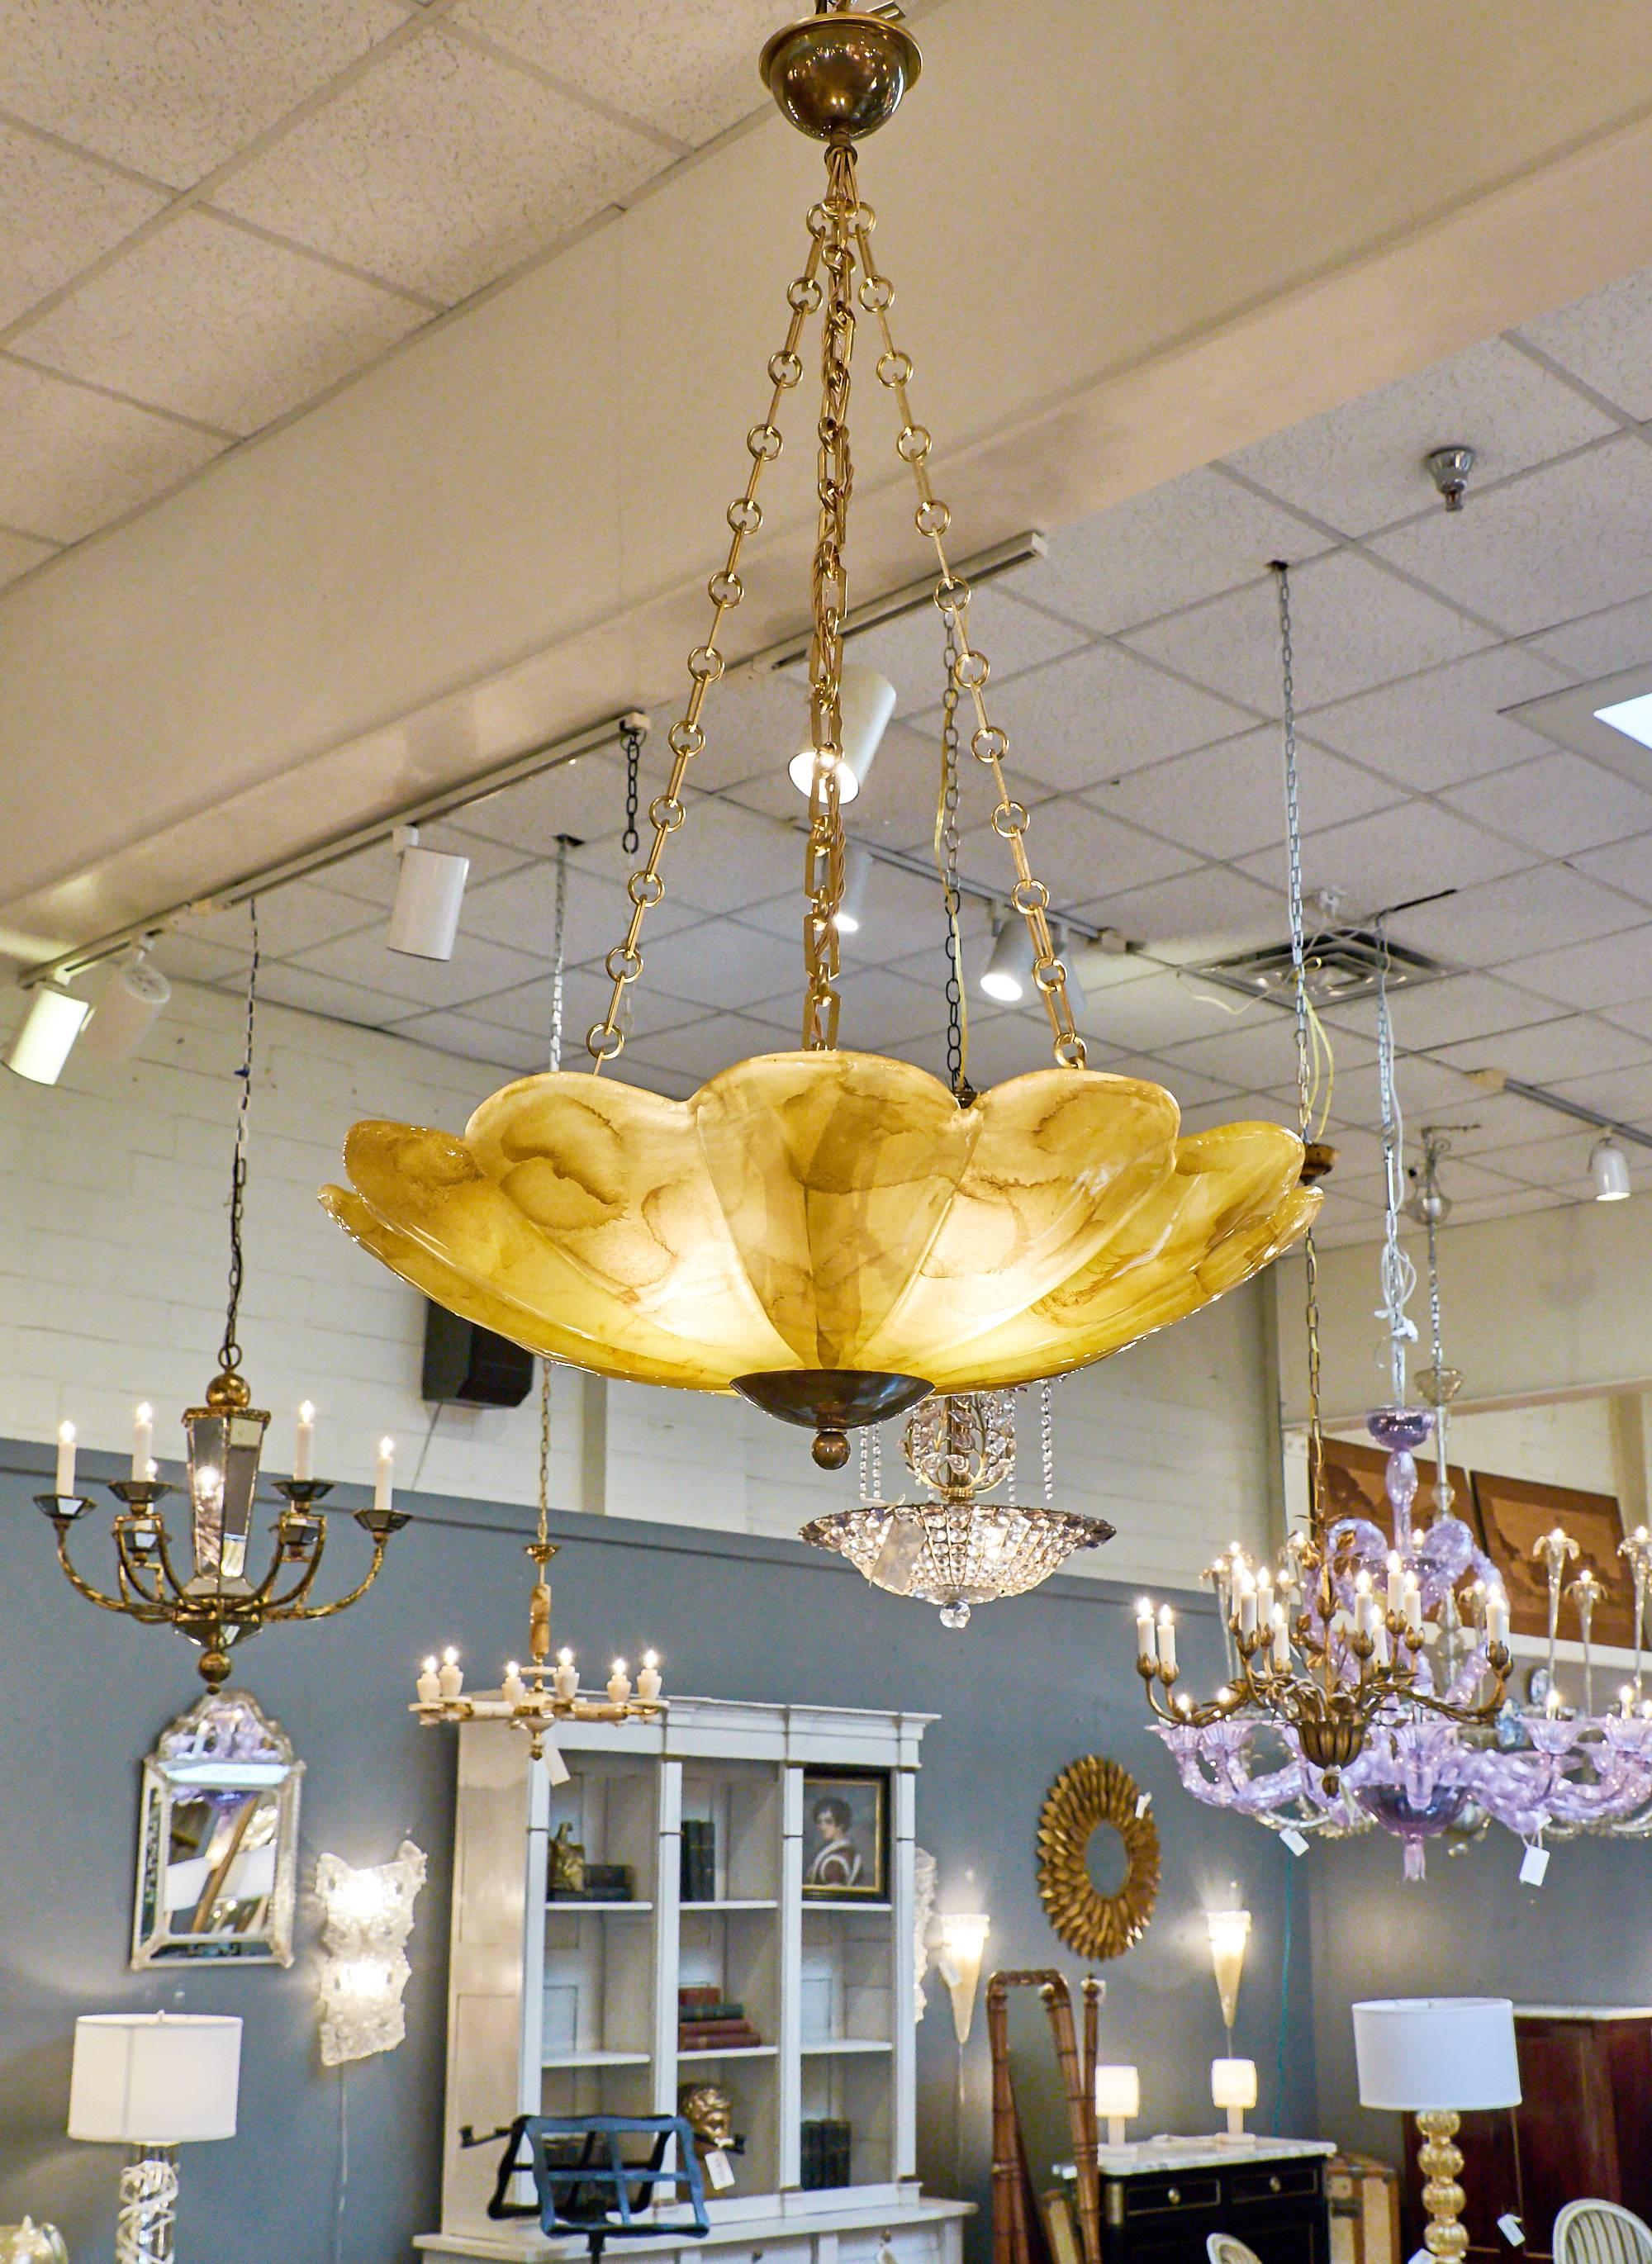 Lovely amber and gold colored Murano glass make this hanging pendant shaped fixture so unique. The glass, handblown and in a floral shape, hangs from three chains attached to a brass canopy. This wonderful piece glows a warm honey color when lit,